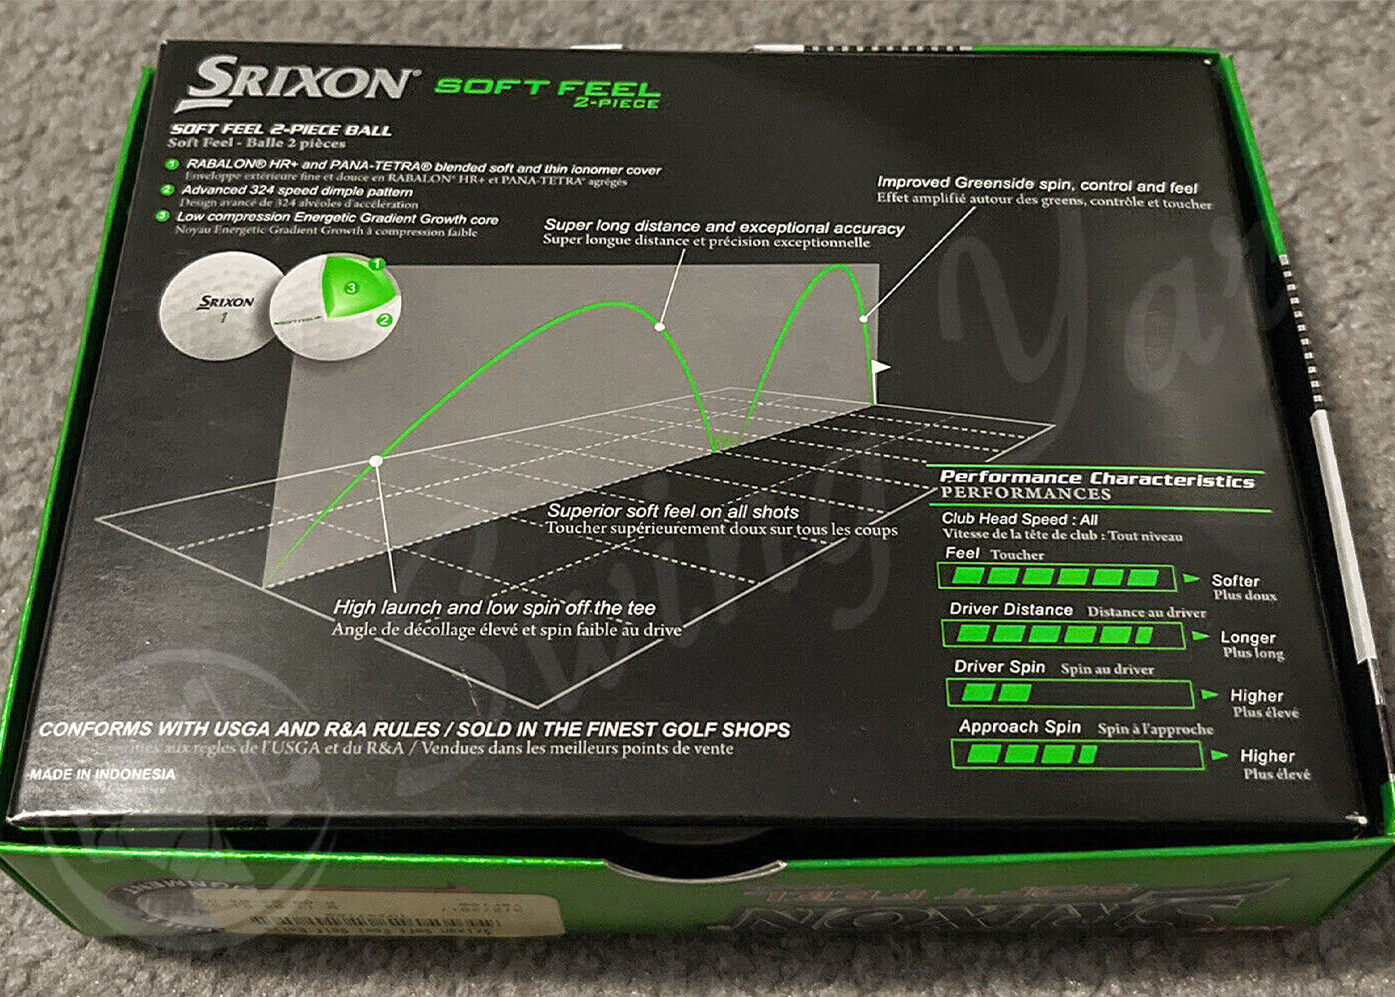 The back side of the box package of the Srixon Soft Feel